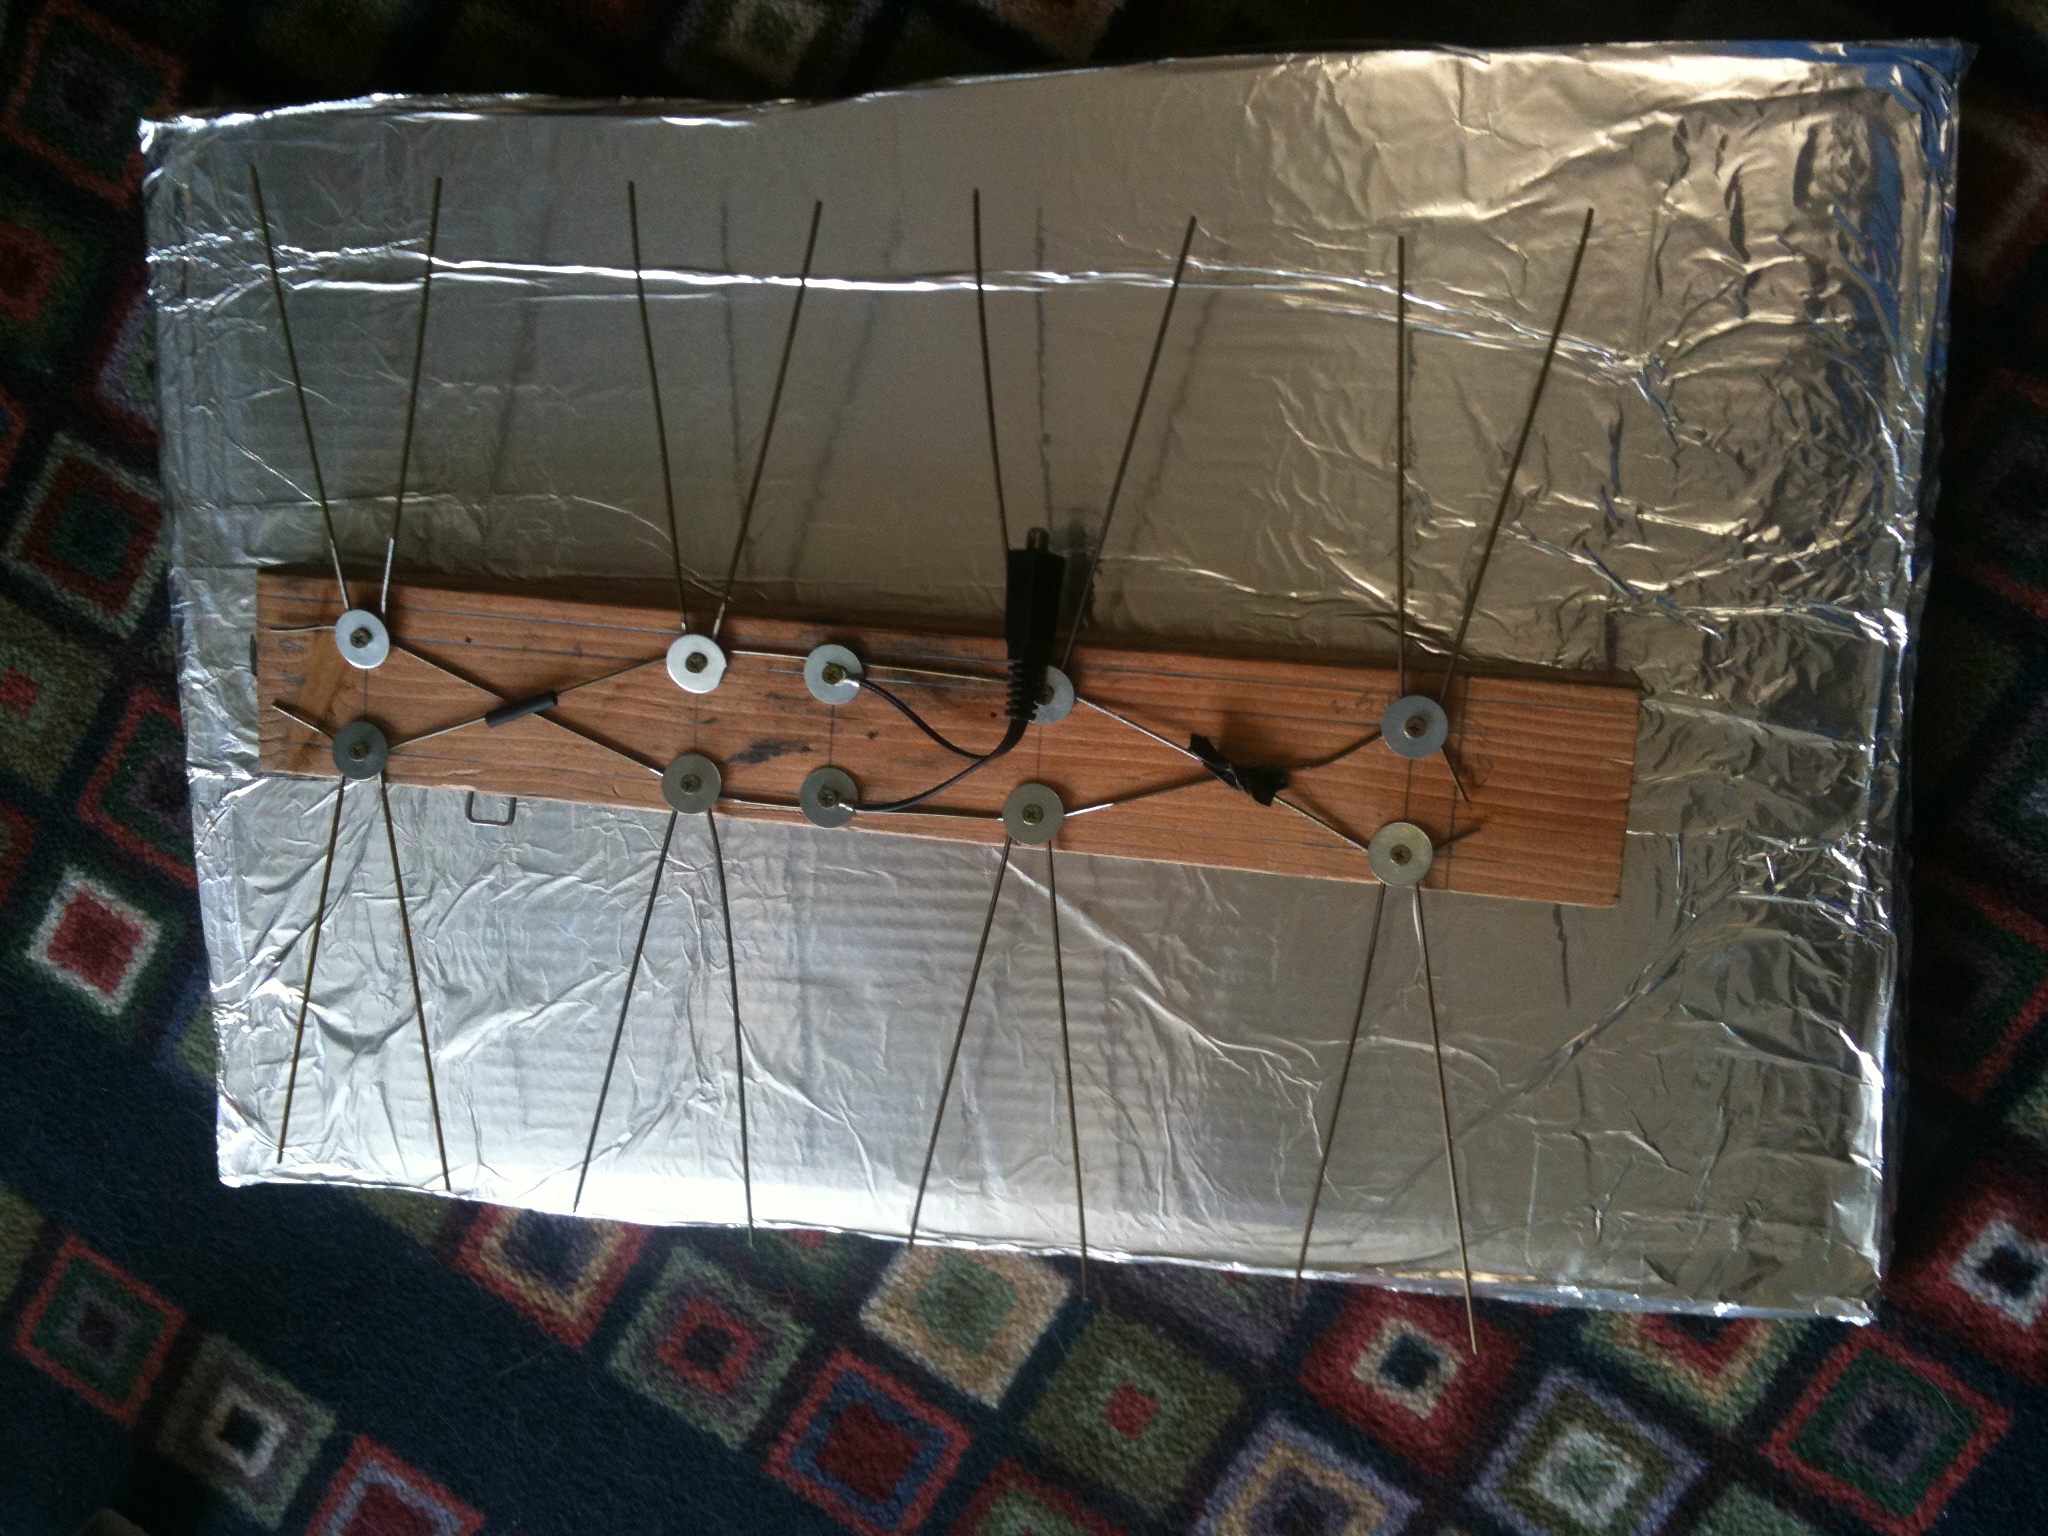 Hdtv Antenna From Coathangars Tinfoil And A 2x4 Austins Imaging Blog